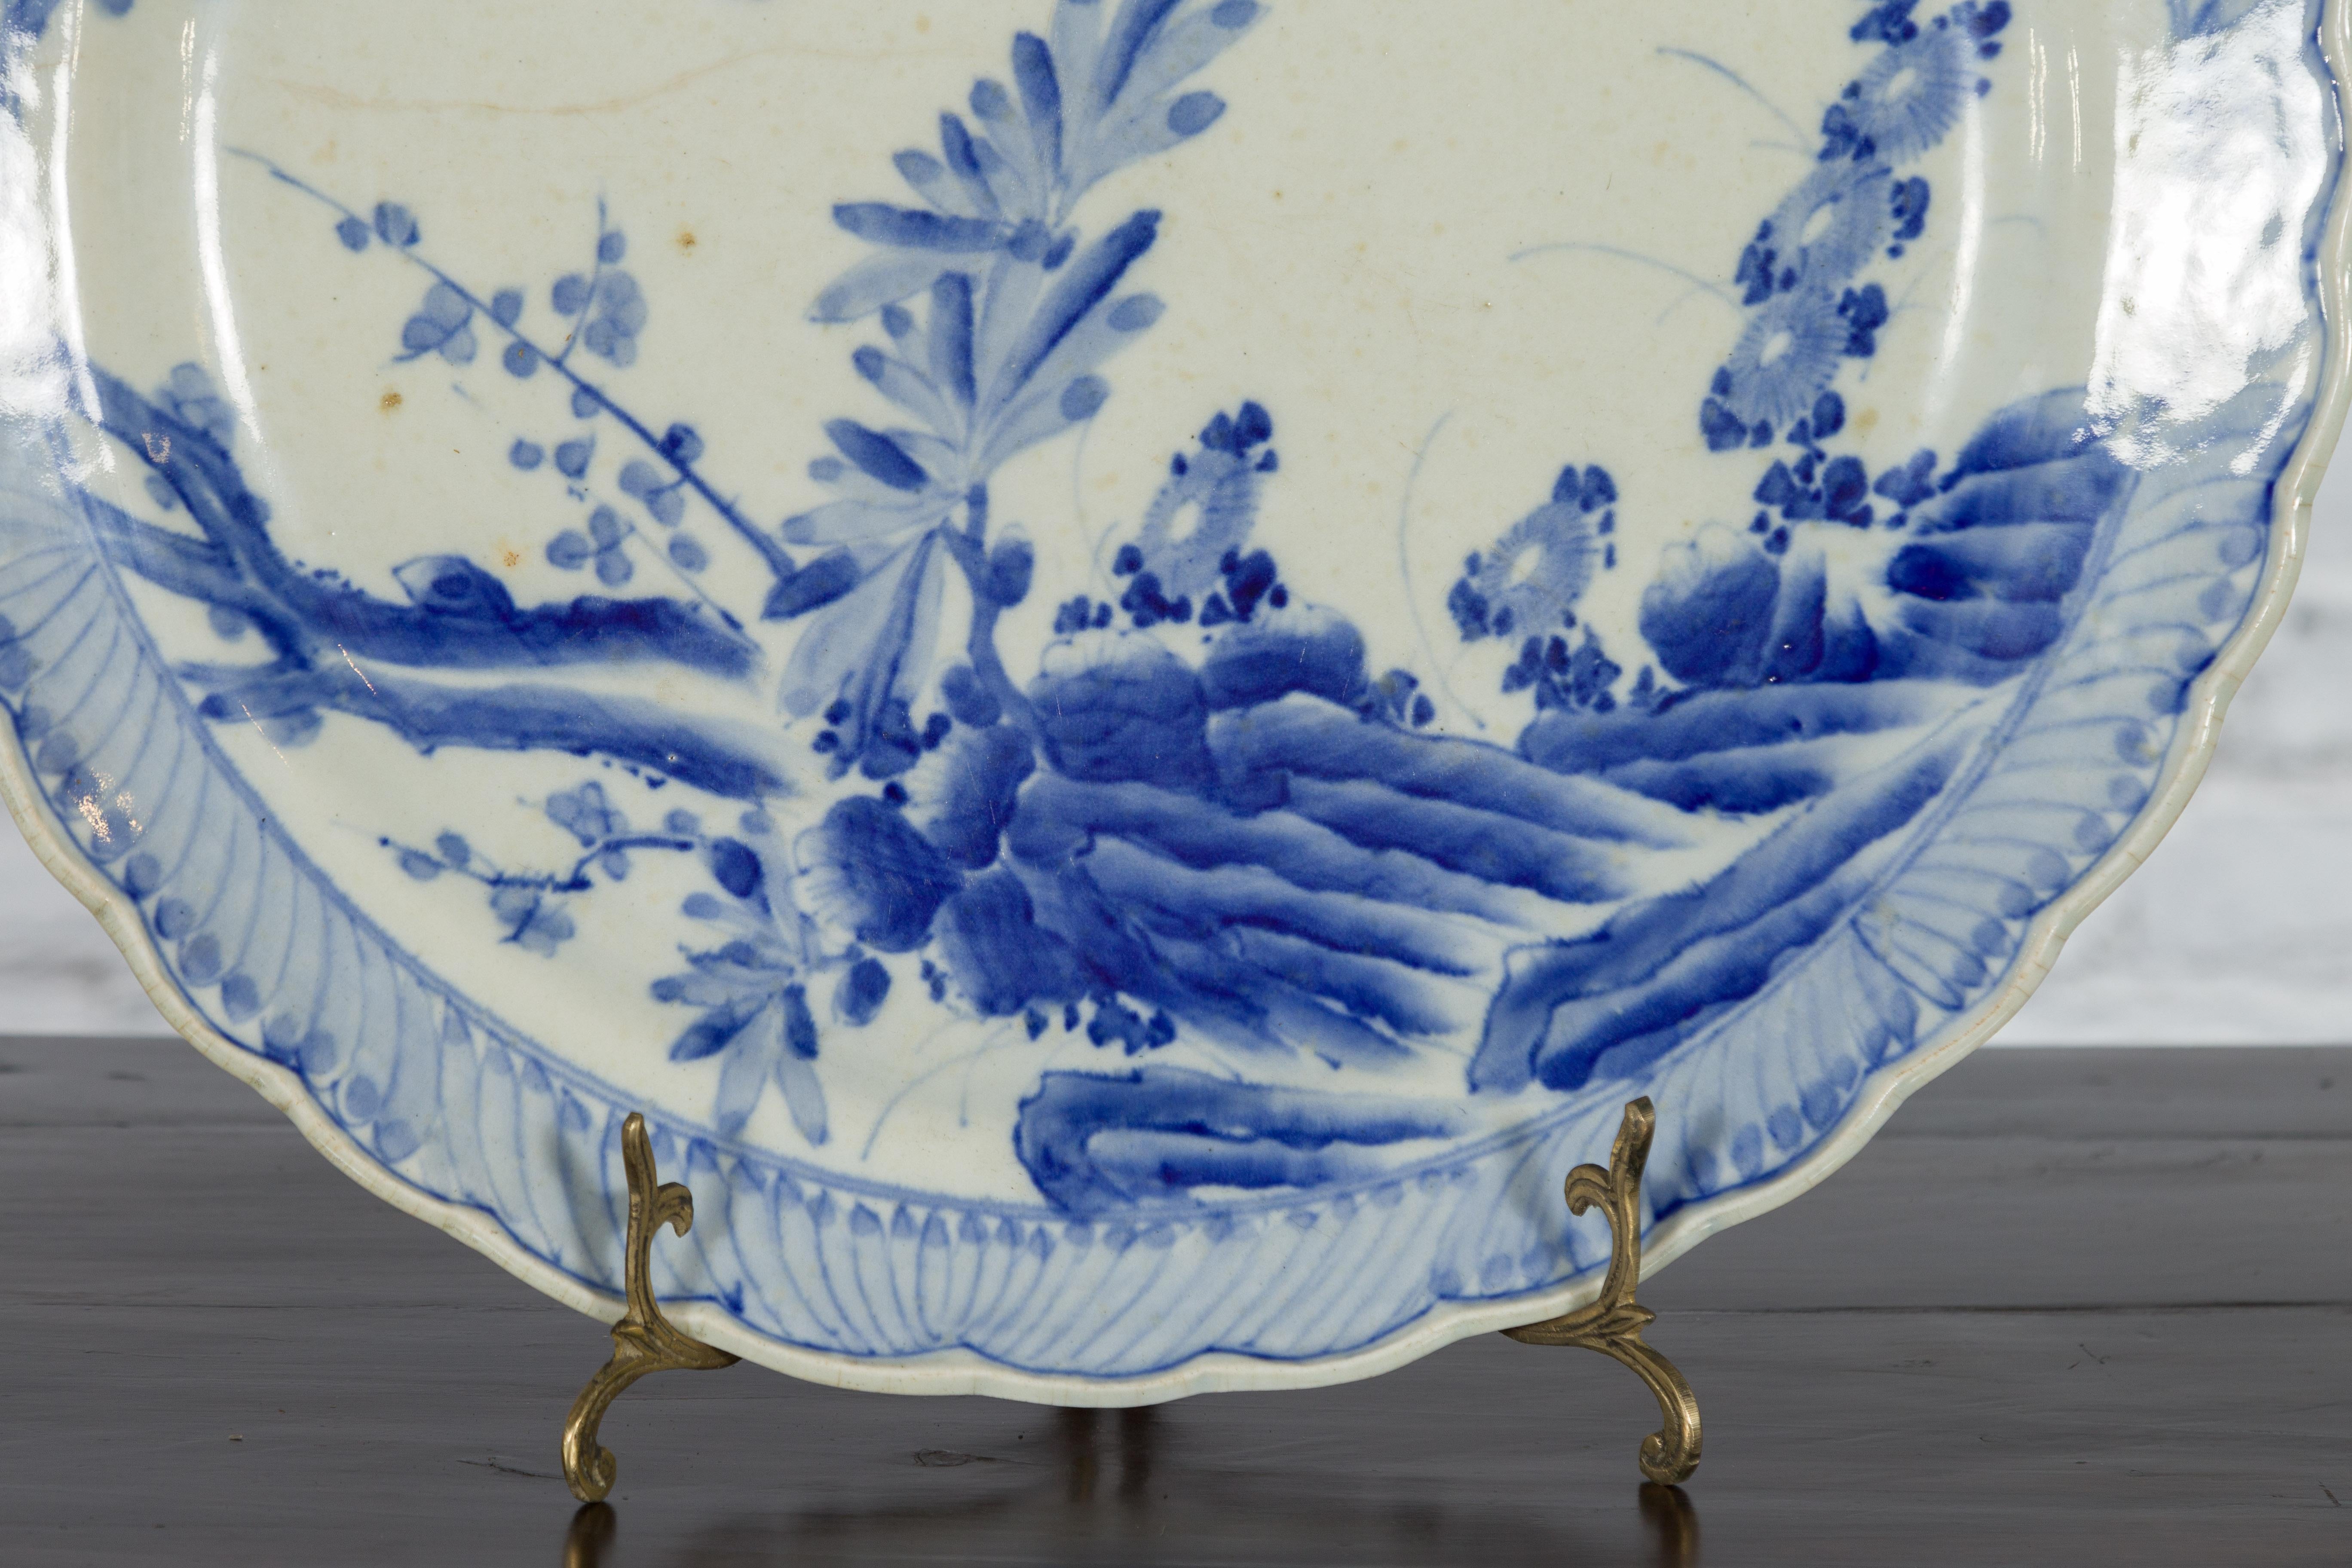 Japanese Blue and White Hand-Painted Porcelain Charger Plate with Foliage Décor For Sale 7